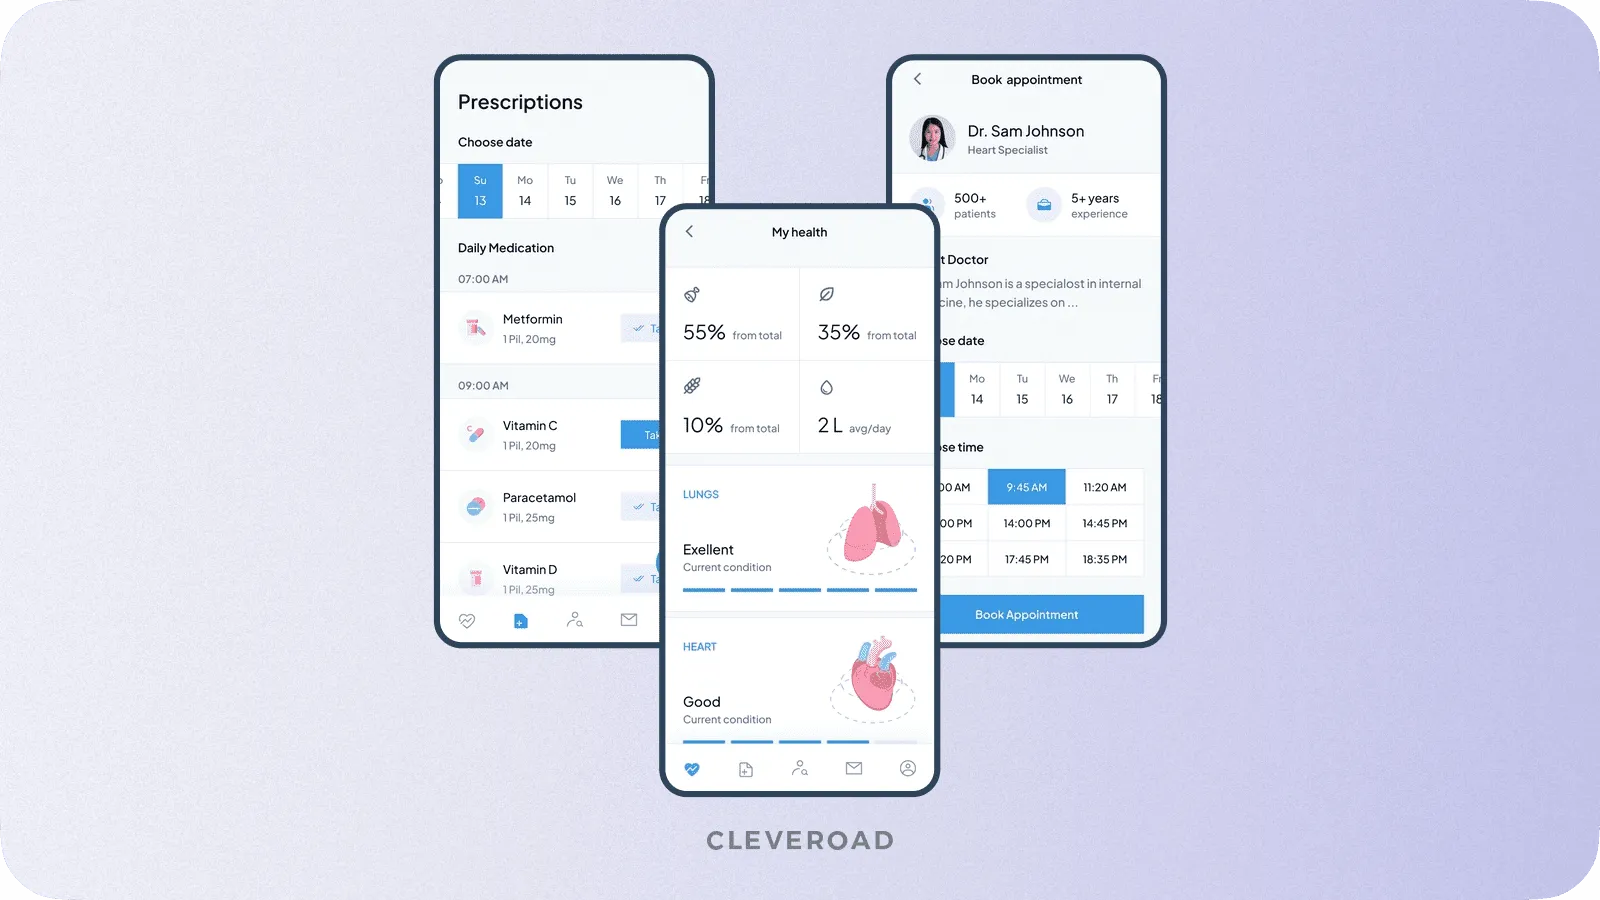 Prescriptions management functionality from Cleveroad